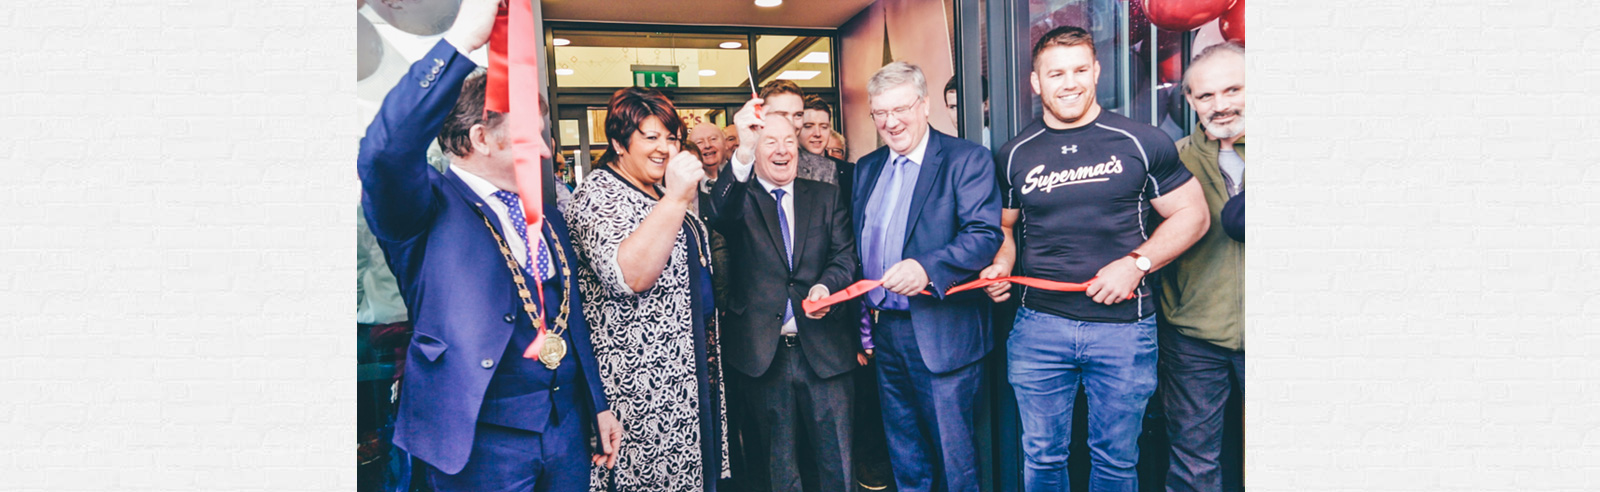 Video: The Galway Plaza Official Opening